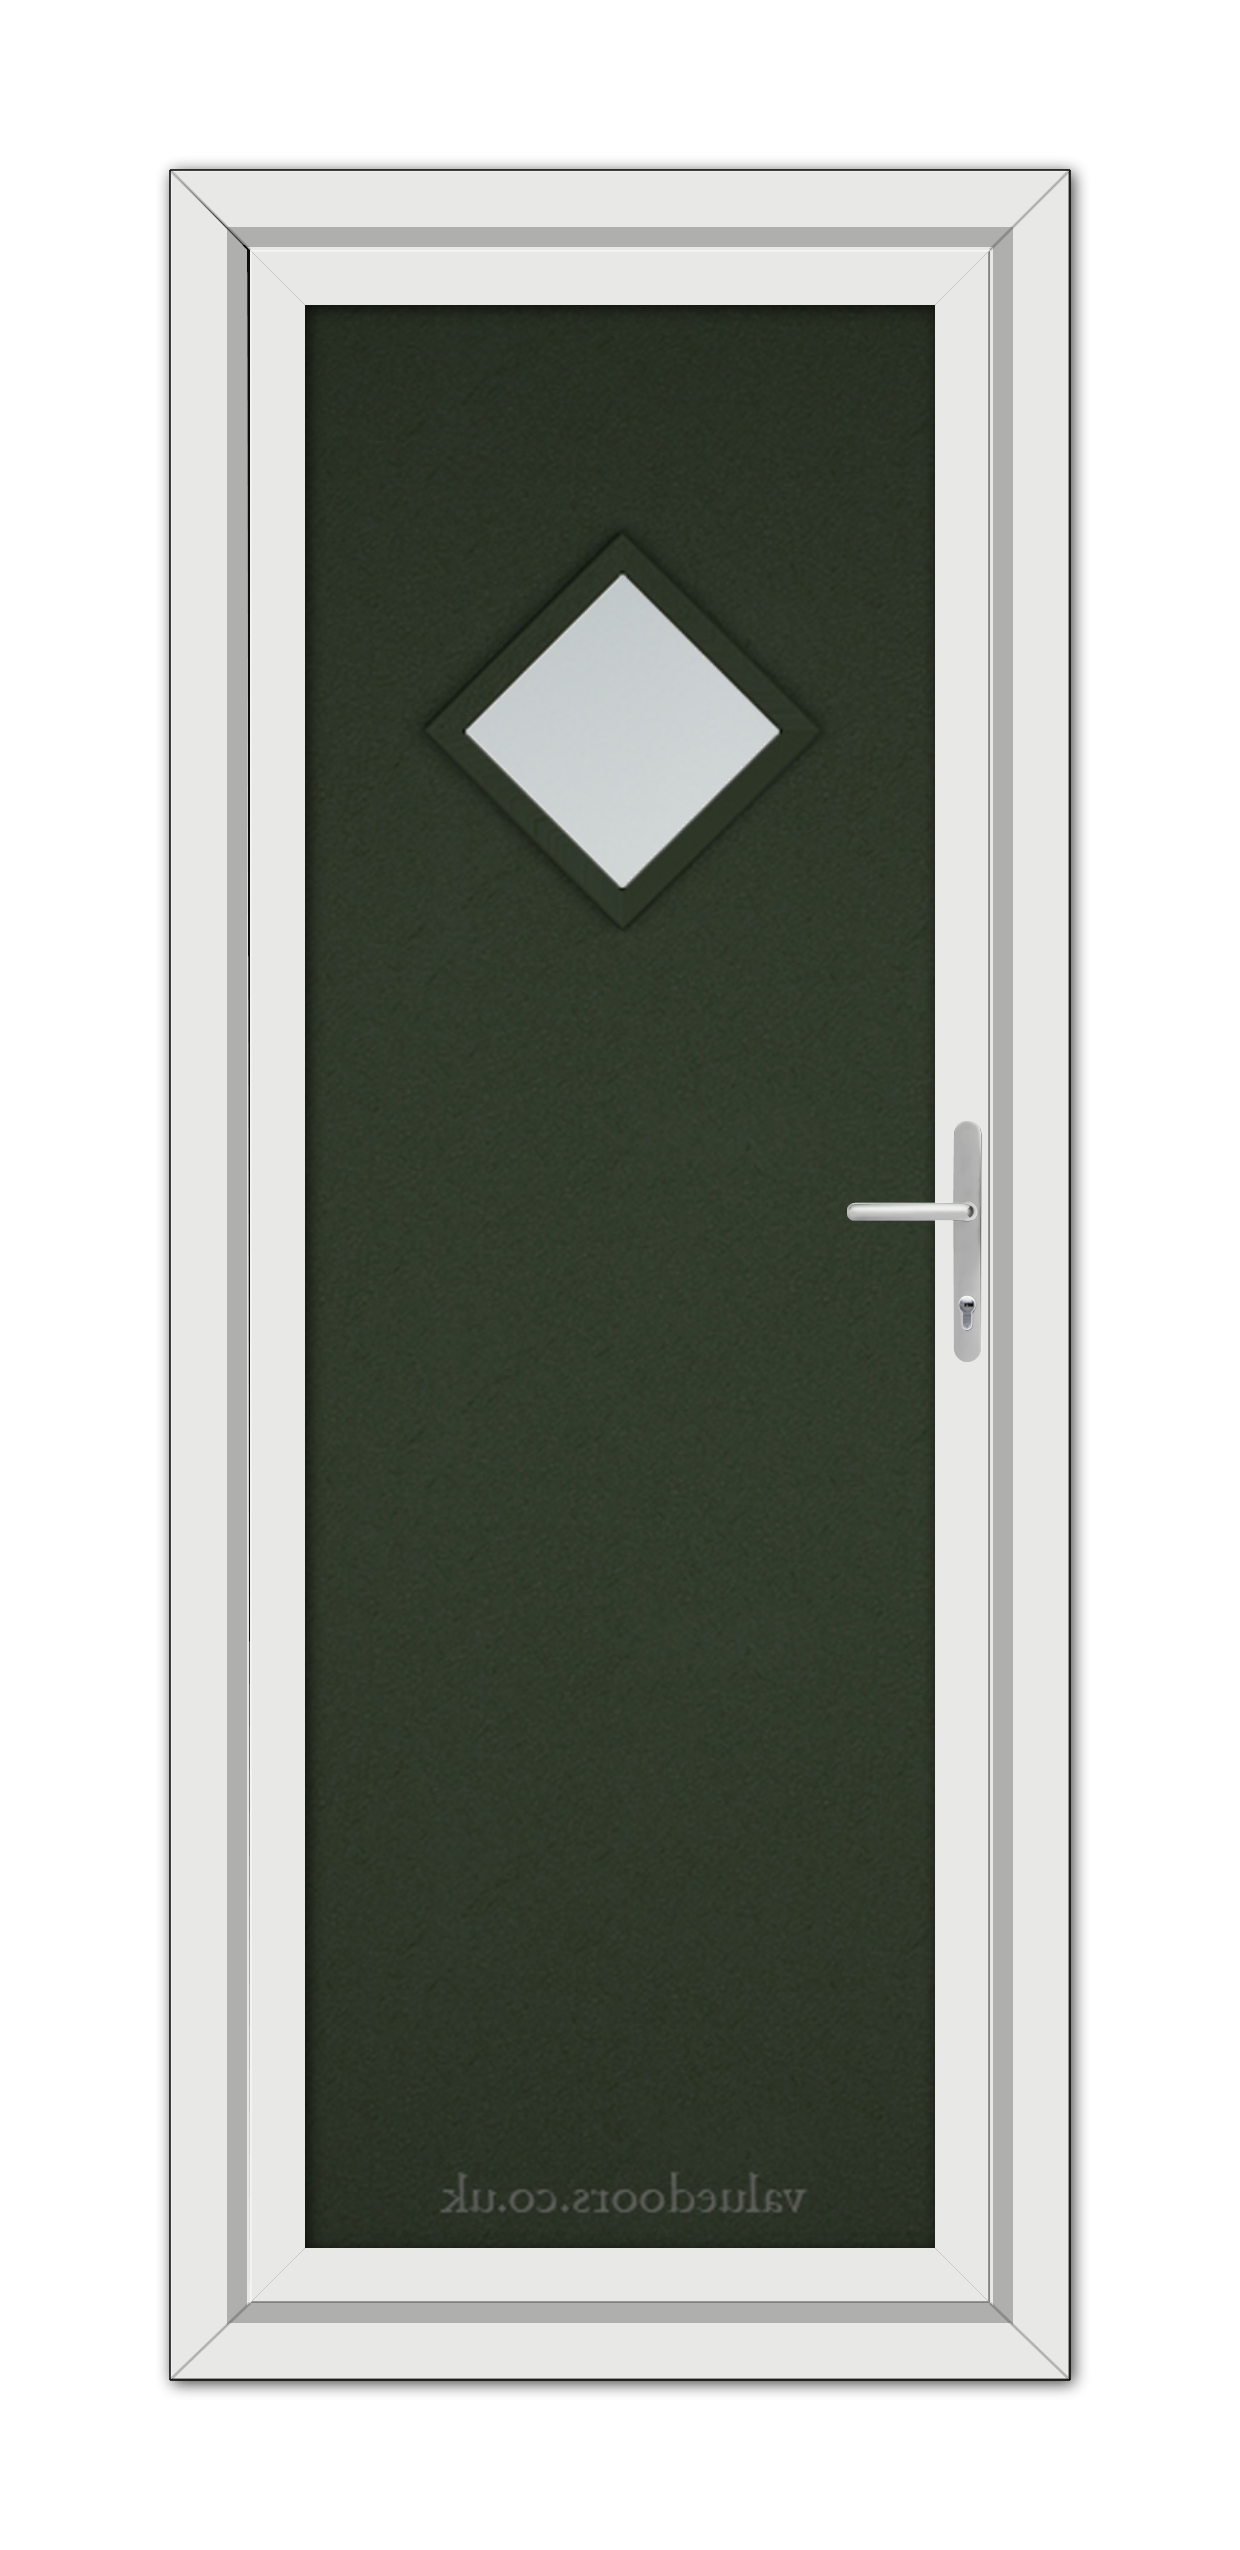 A Green Modern 5131 uPVC Door with a white frame, featuring a diamond-shaped window at the top and a silver handle on the right side.